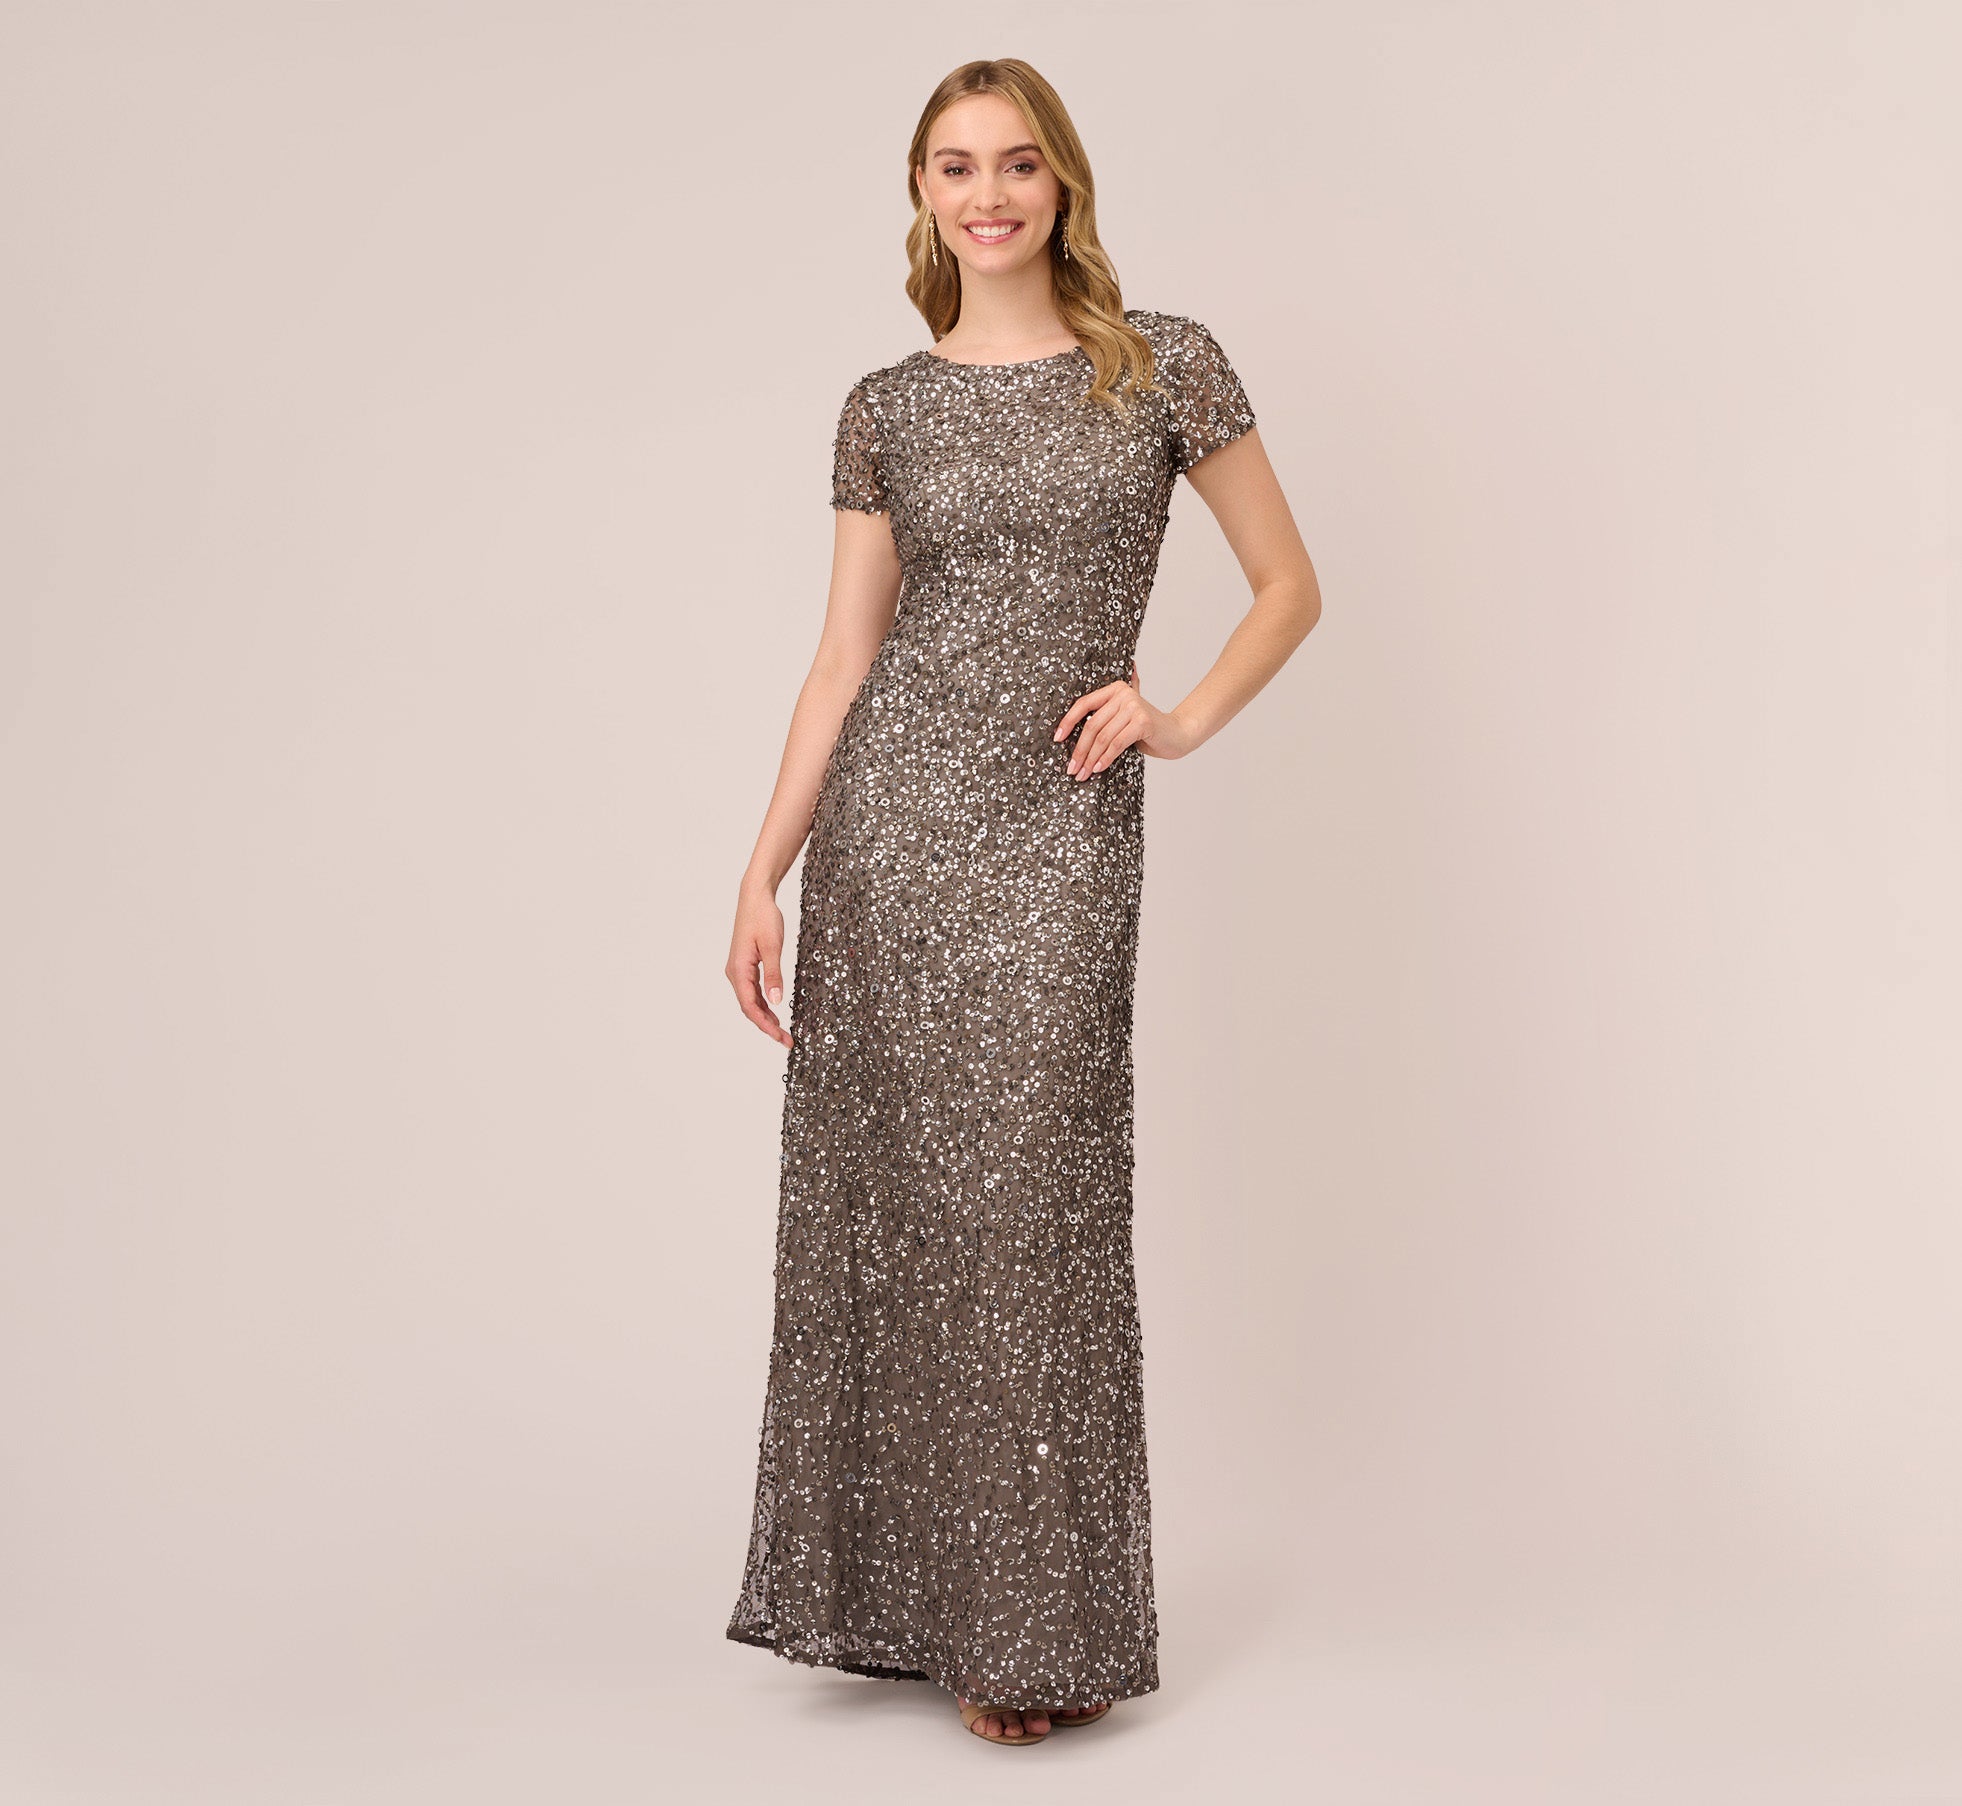 Adrianna Papell - Shop Dresses, Gowns, Jumpsuits More